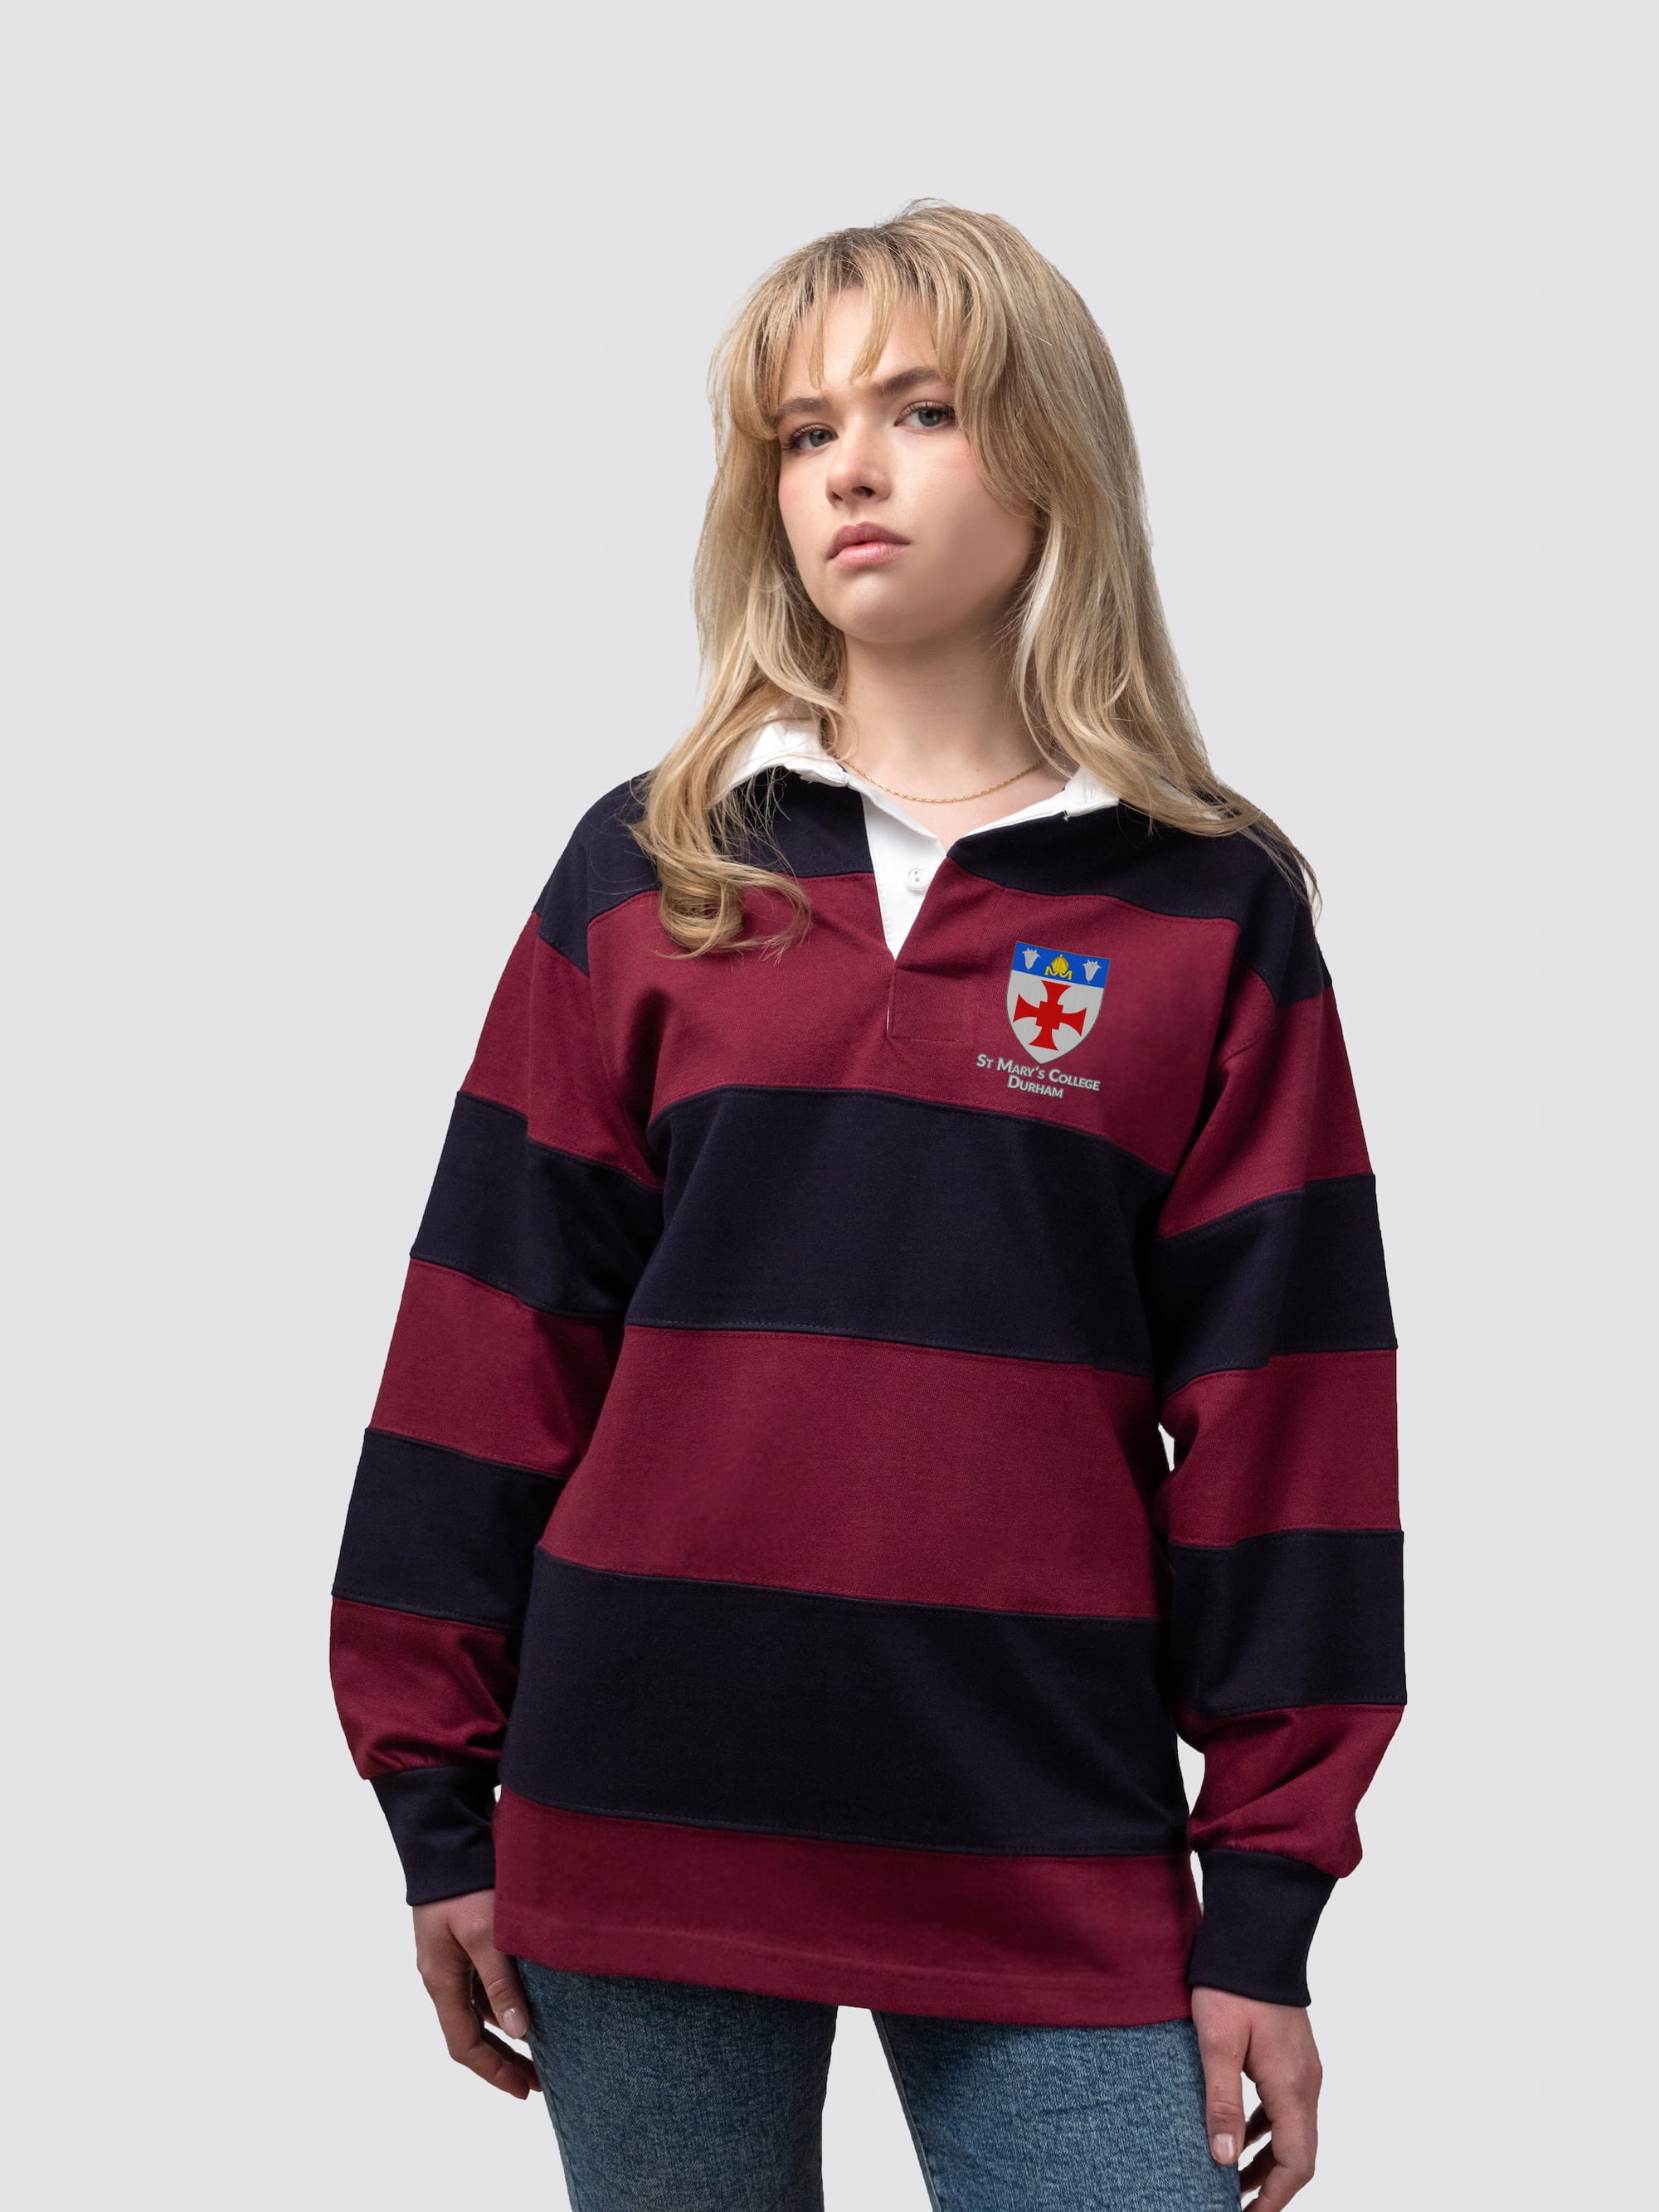 St Mary's College rugby shirt, with burgundy and navy stripes